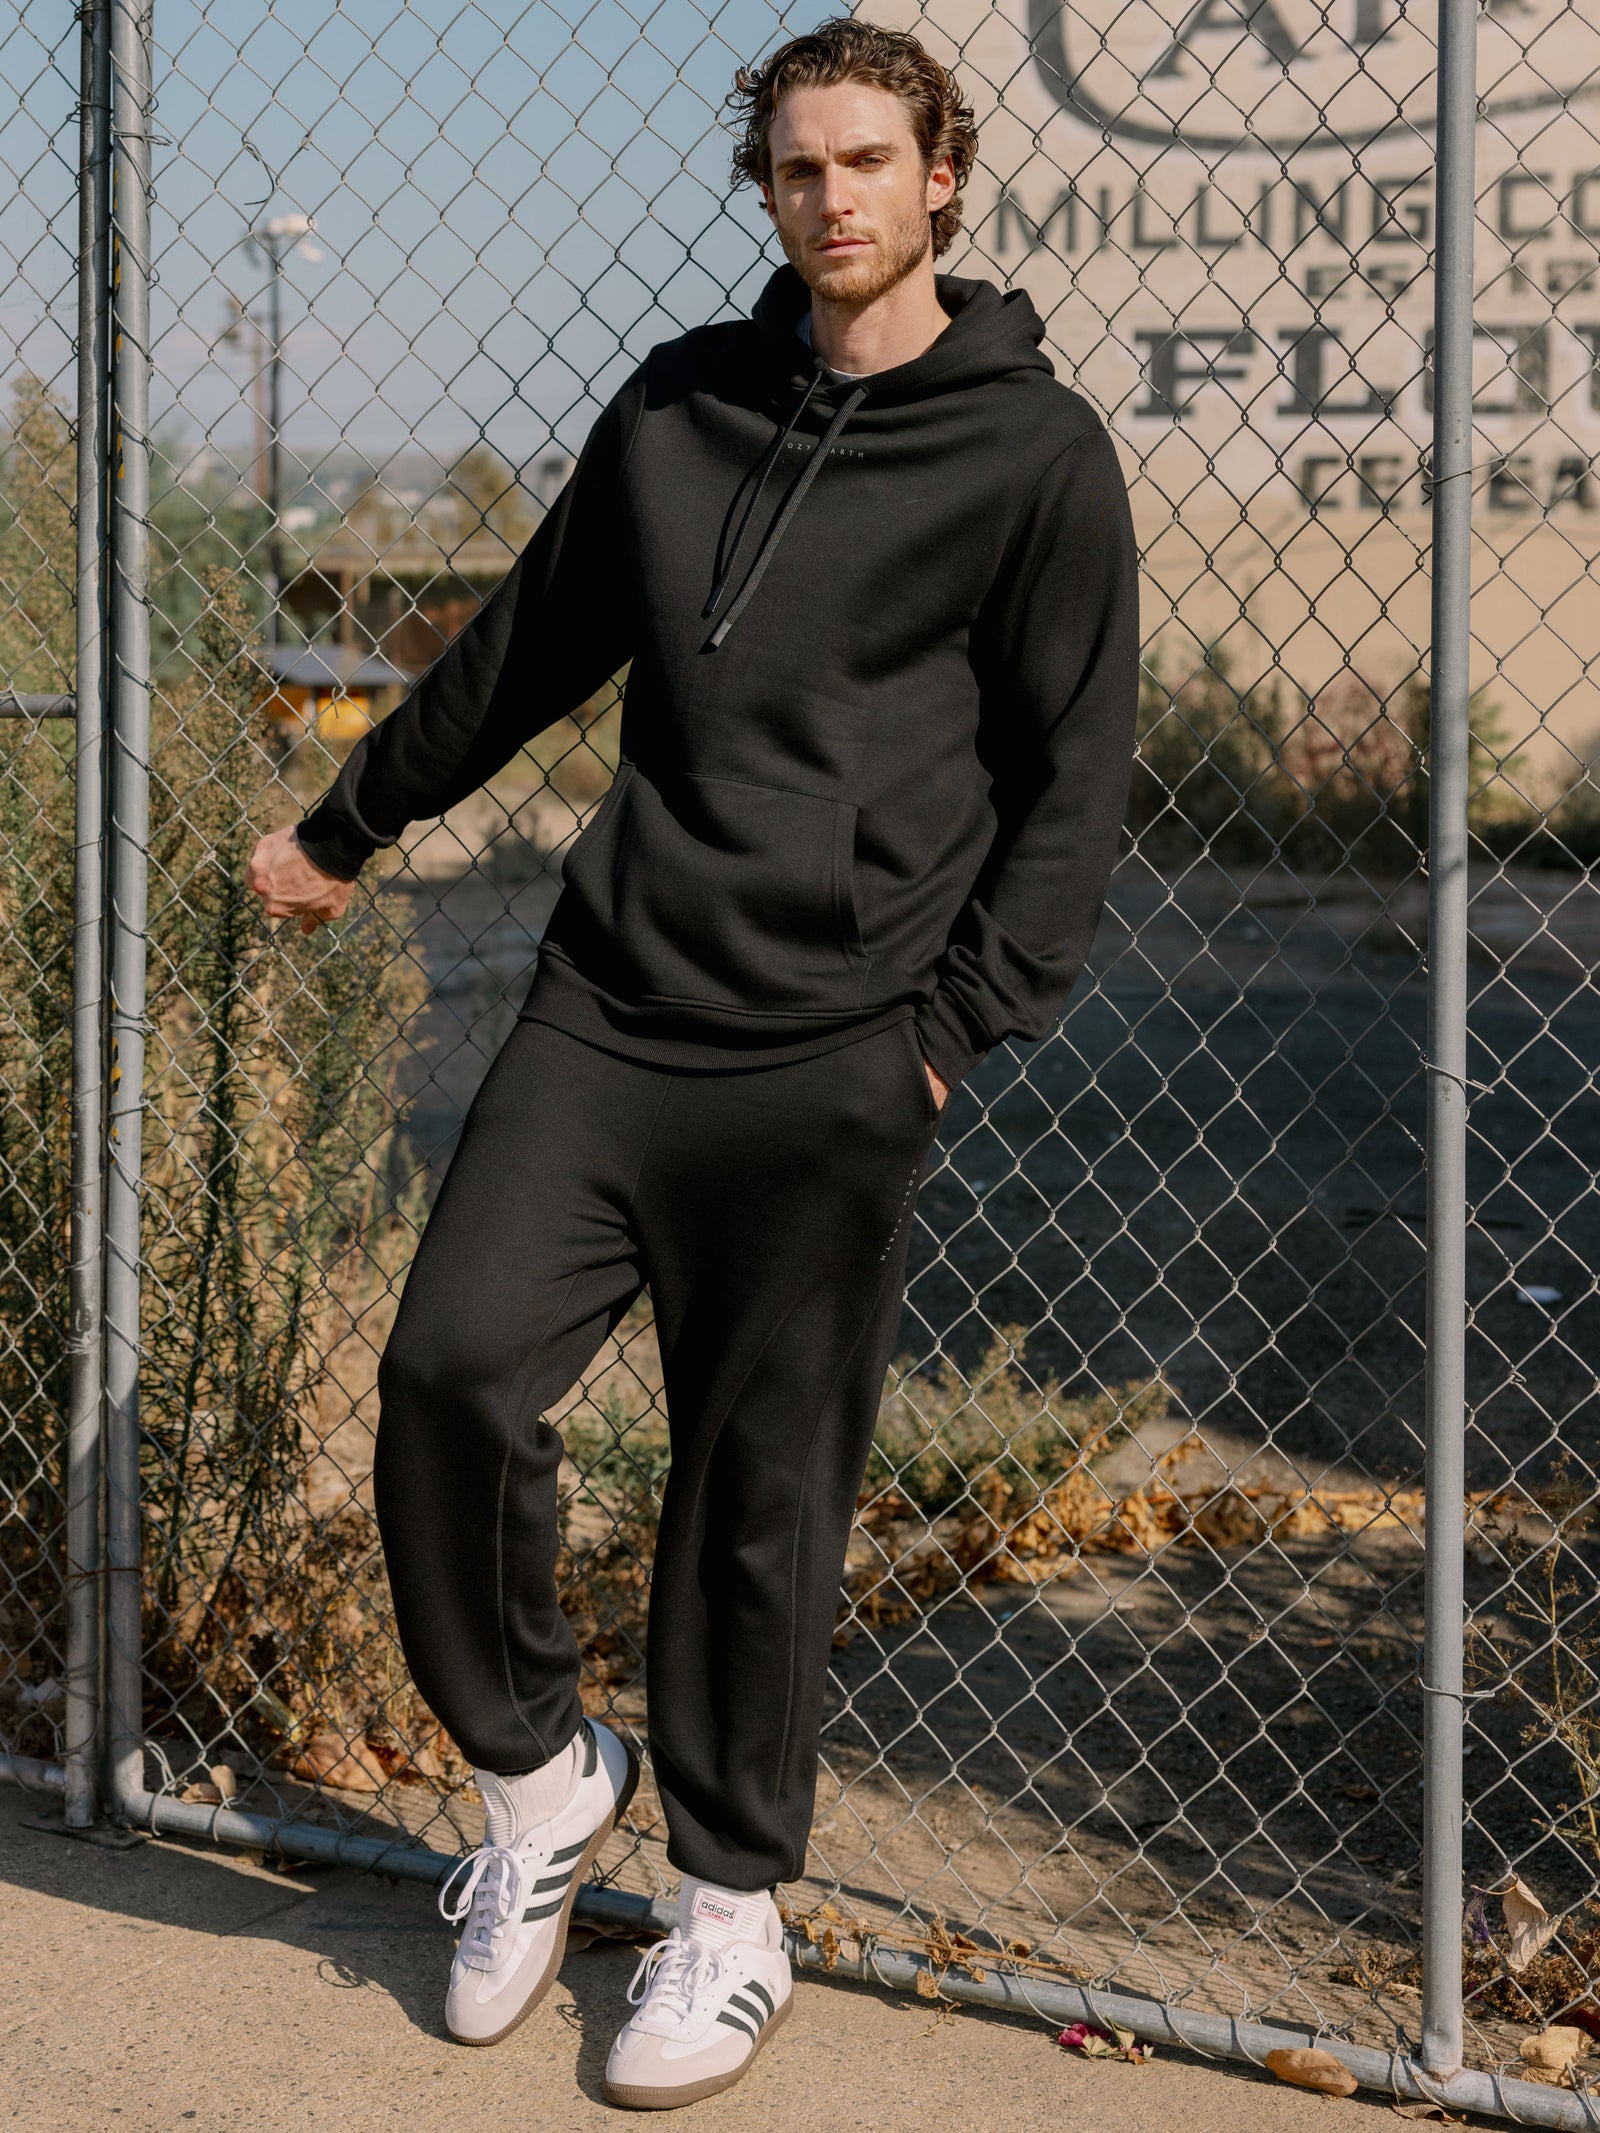 Man wearing black cityscape hoodie set in front of chain link fence 